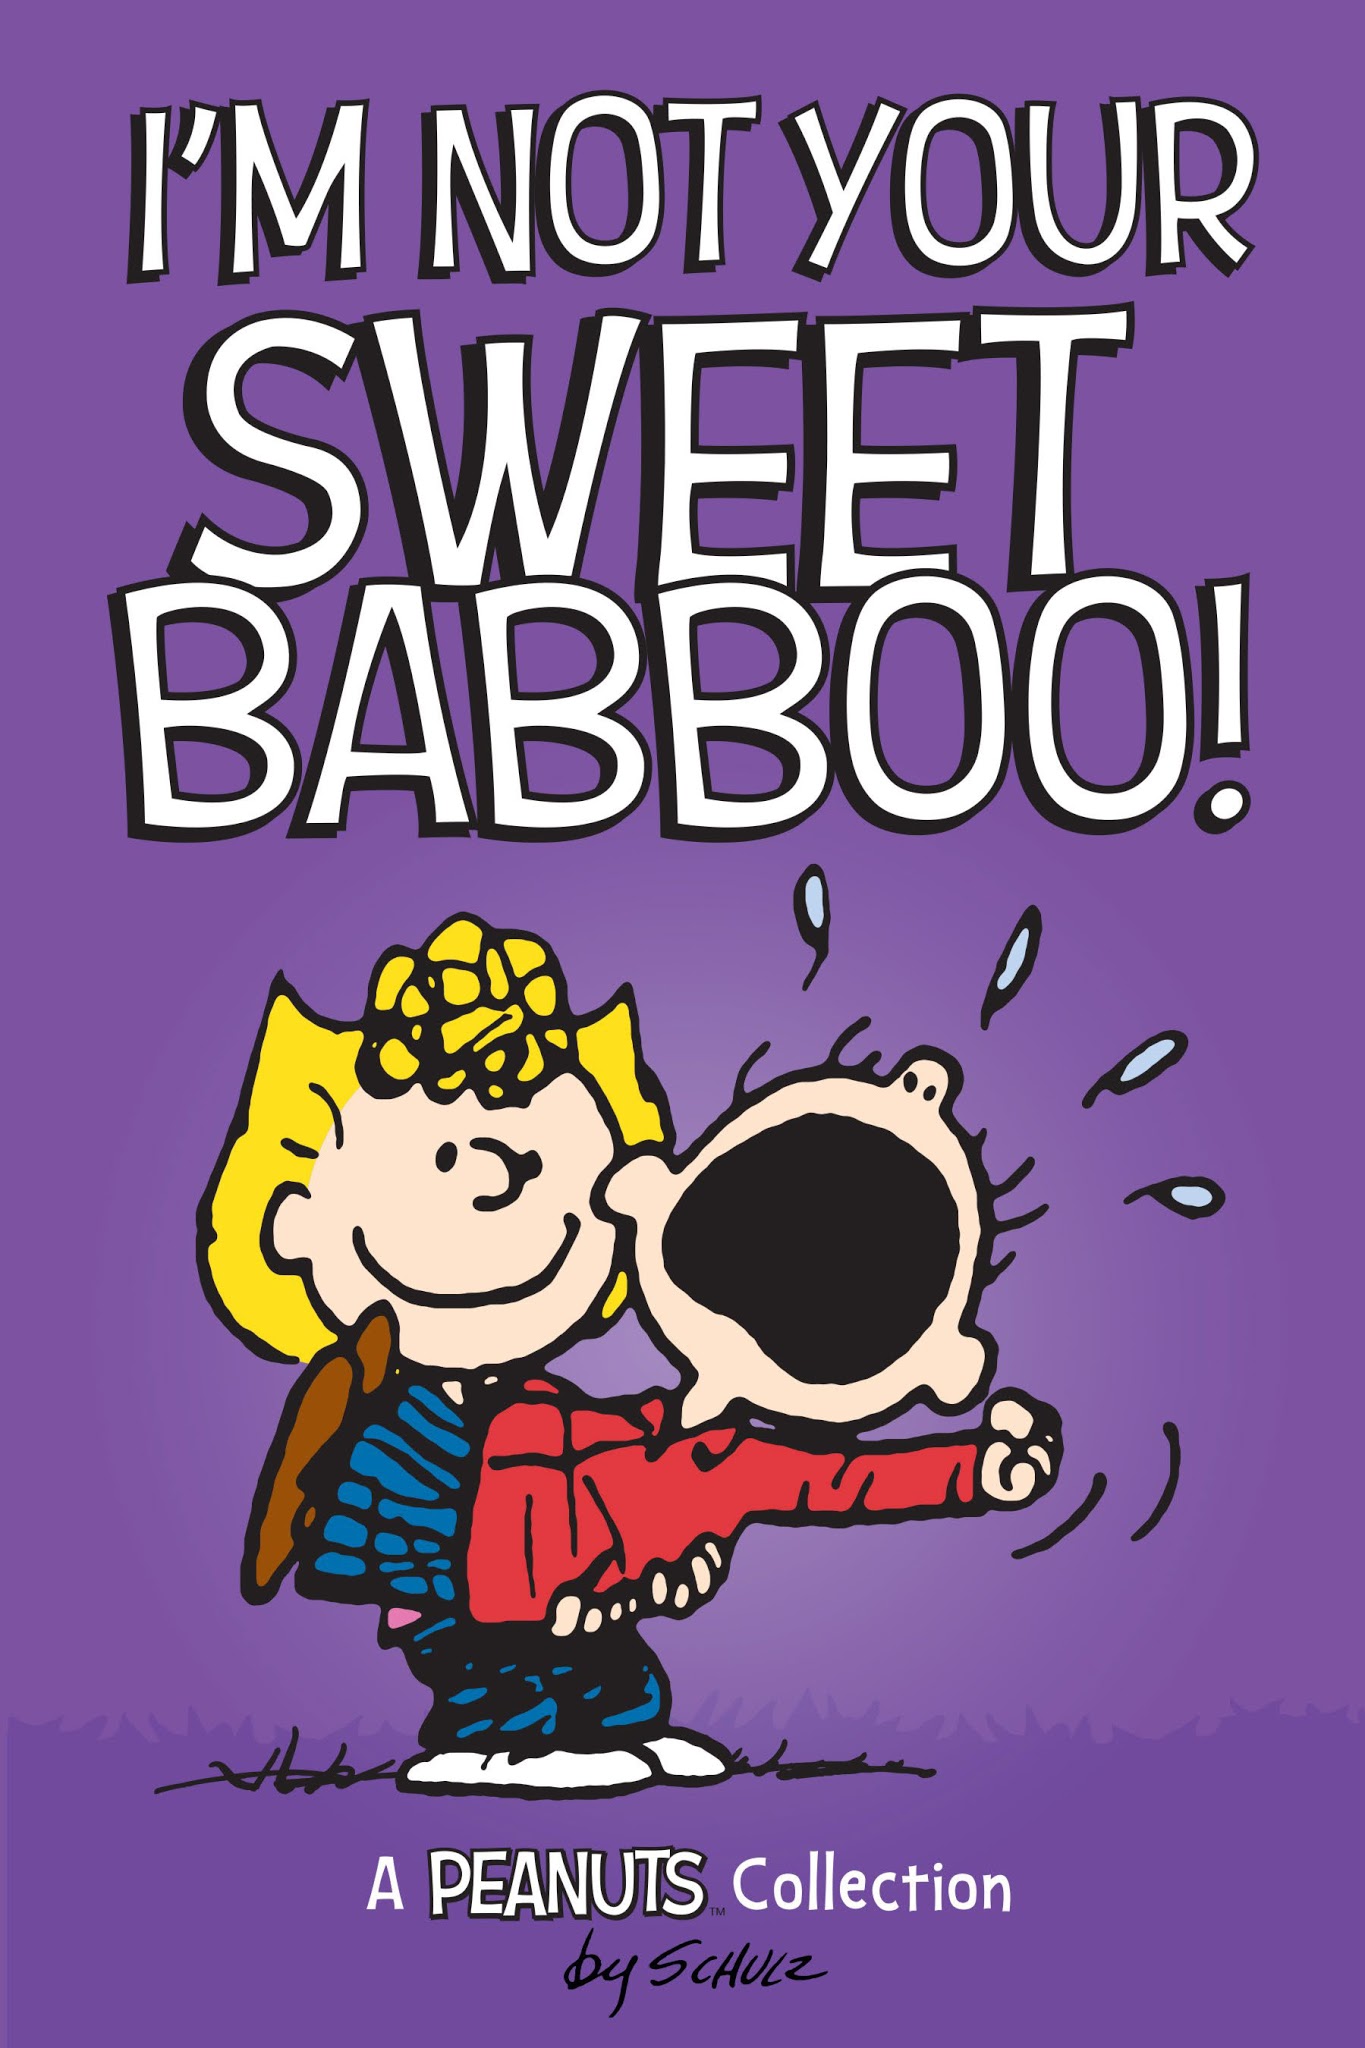 Read online I'm Not Your Sweet Babboo! comic -  Issue # TPB - 1